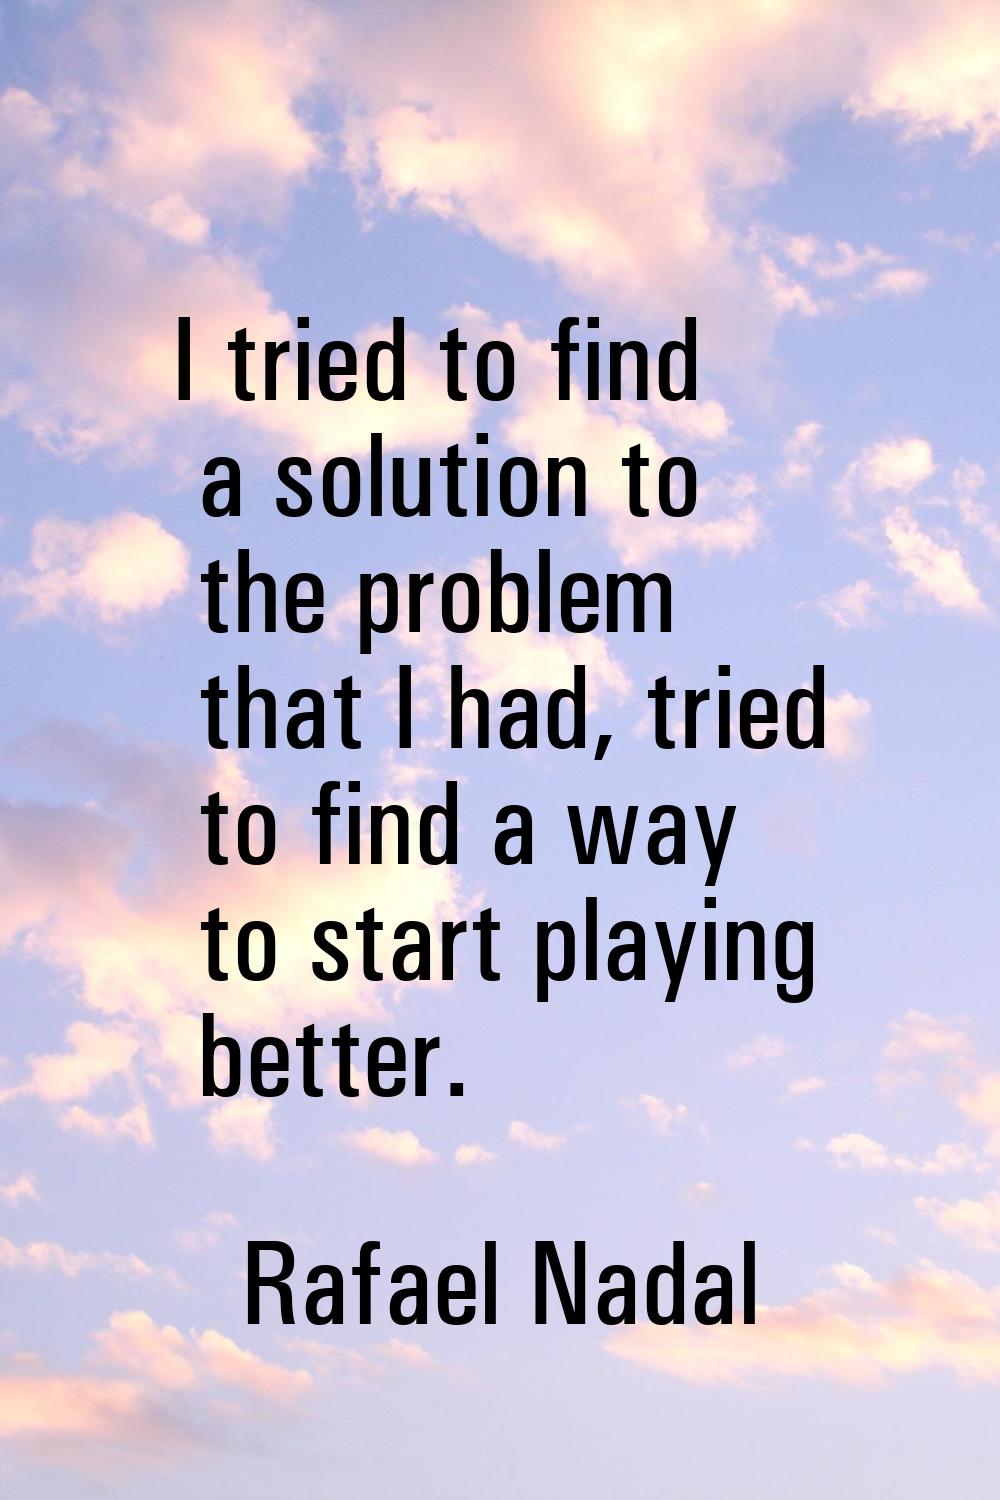 I tried to find a solution to the problem that I had, tried to find a way to start playing better.